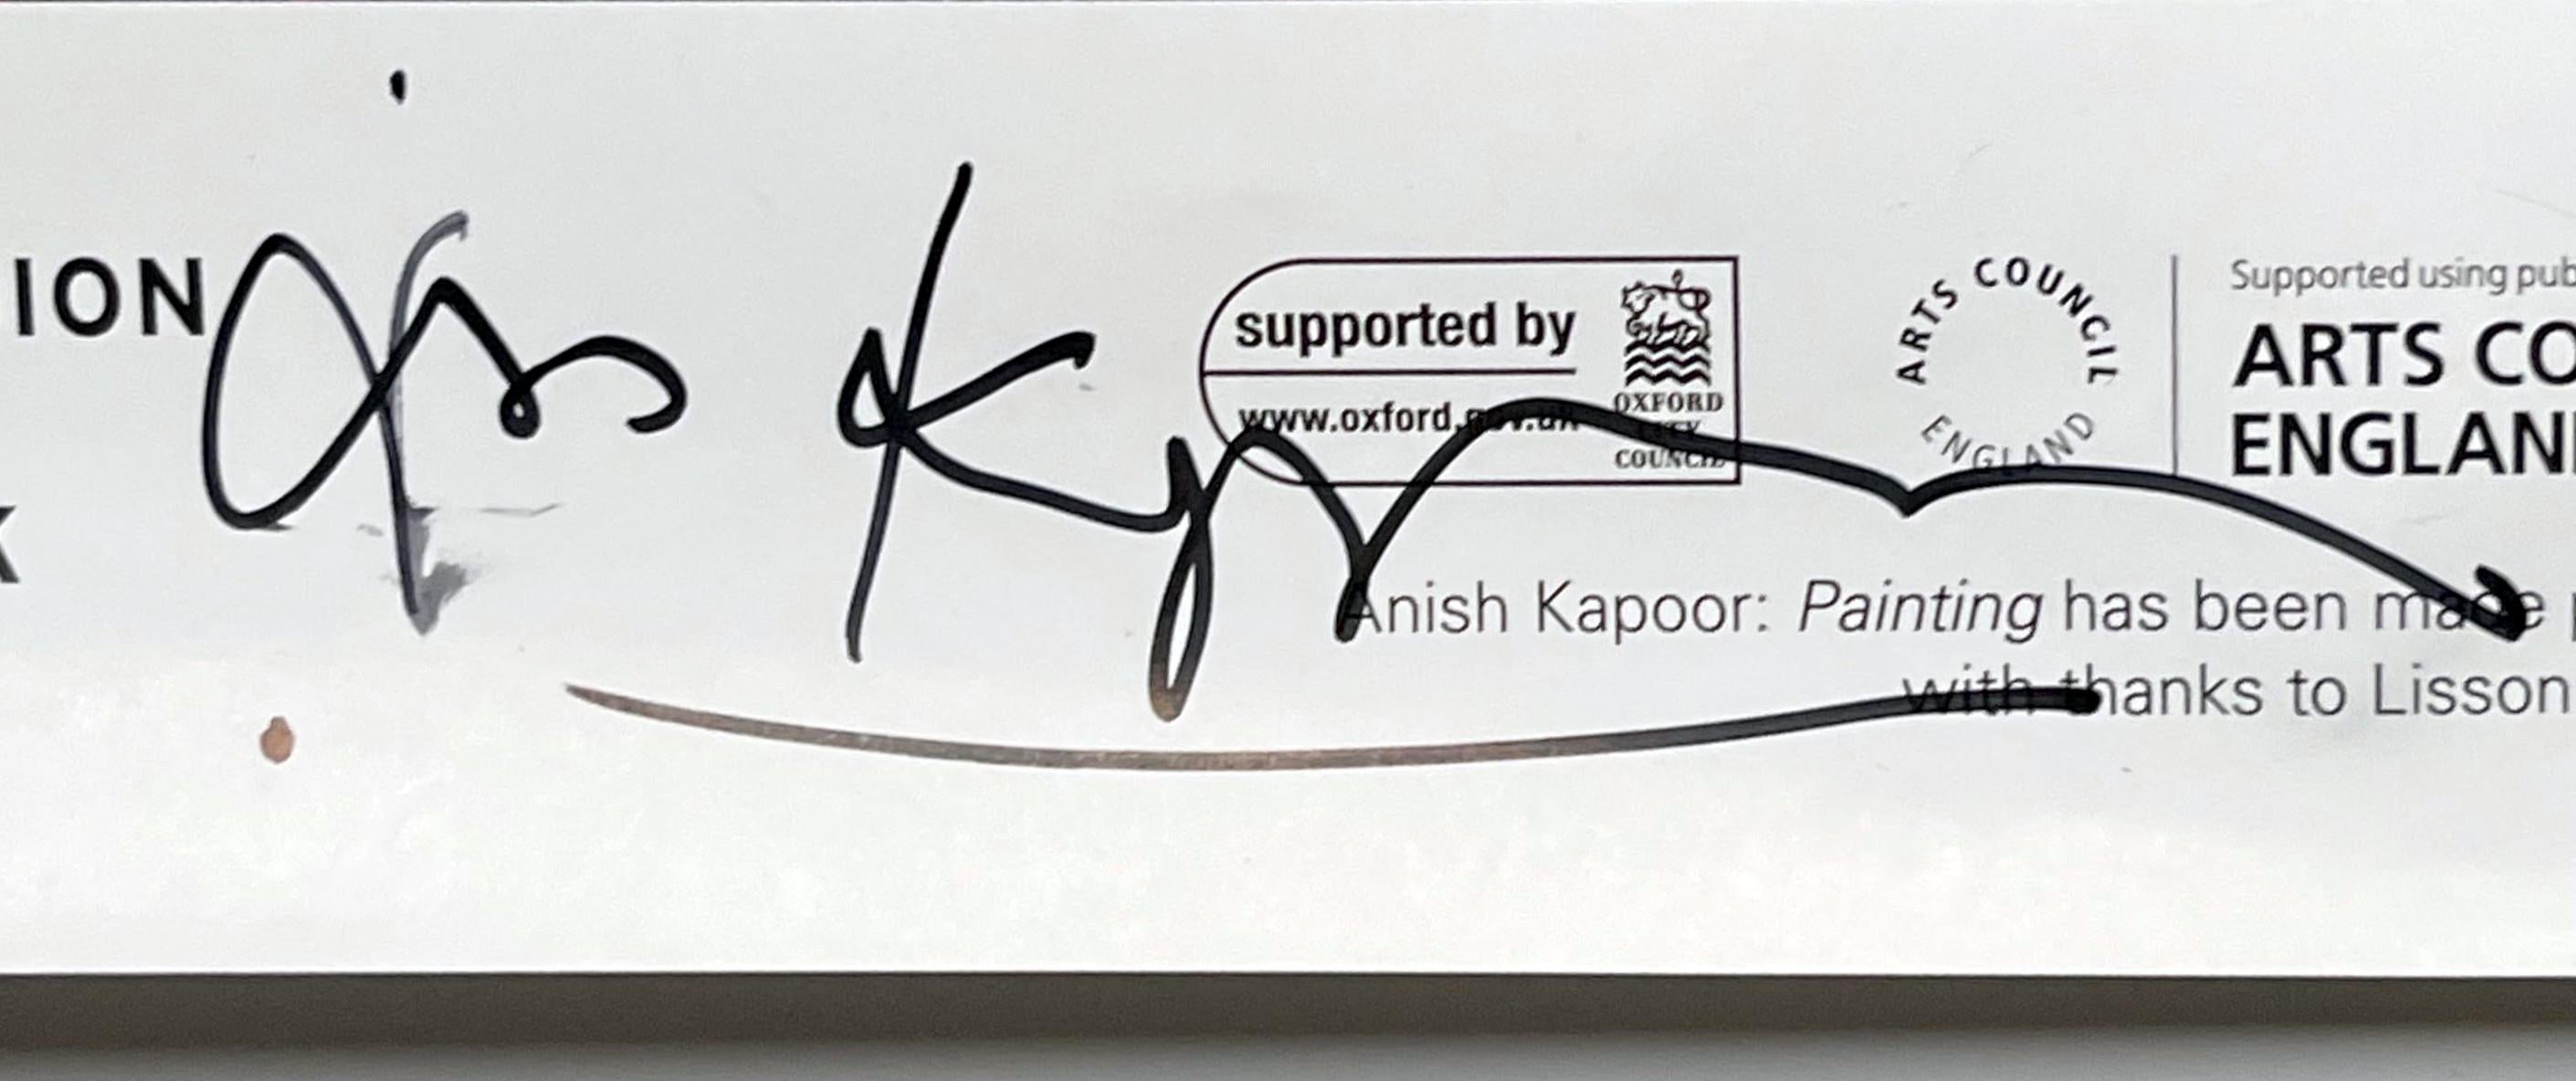 Anish Kapoor at Modern Art Oxford (hand signed by Anish Kapoor) For Sale 1